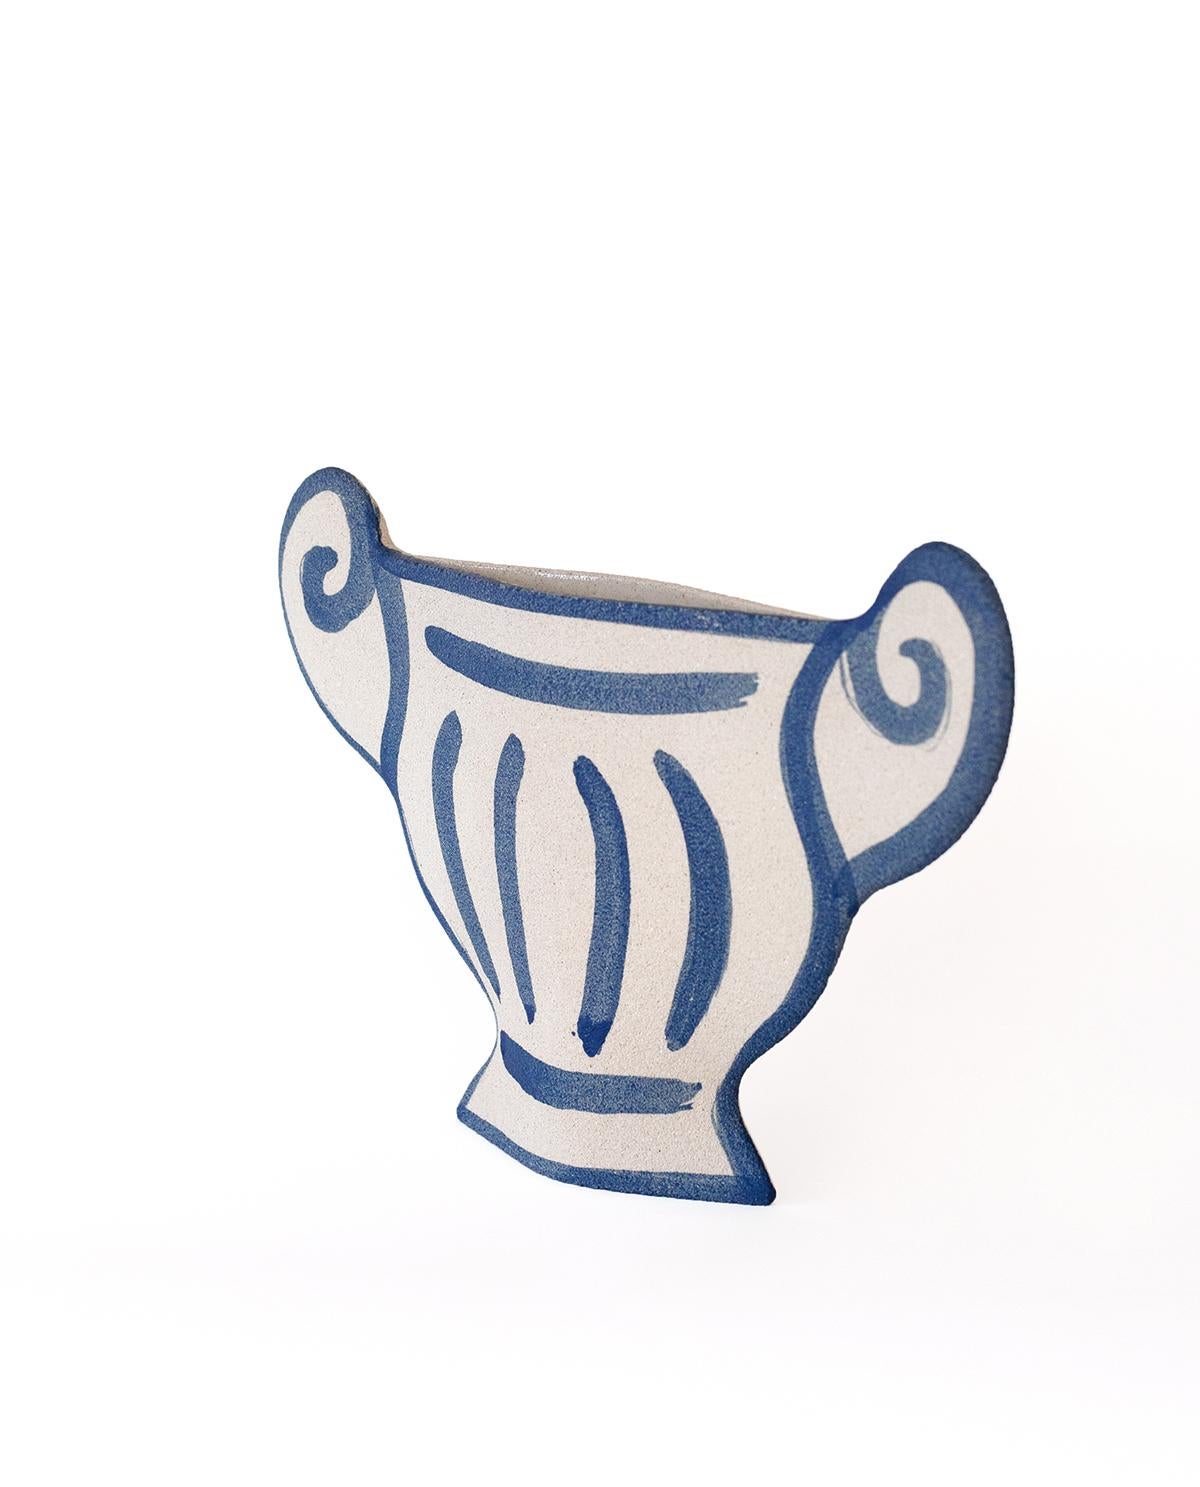 A part of a captivating new line blending ancient Greek pottery with contemporary design, the ‘Greek Coupe’ vase showcases delicate blue underglaze illustrations that harmonize traditional and modern aesthetics.
Crafted by our designer, the blue